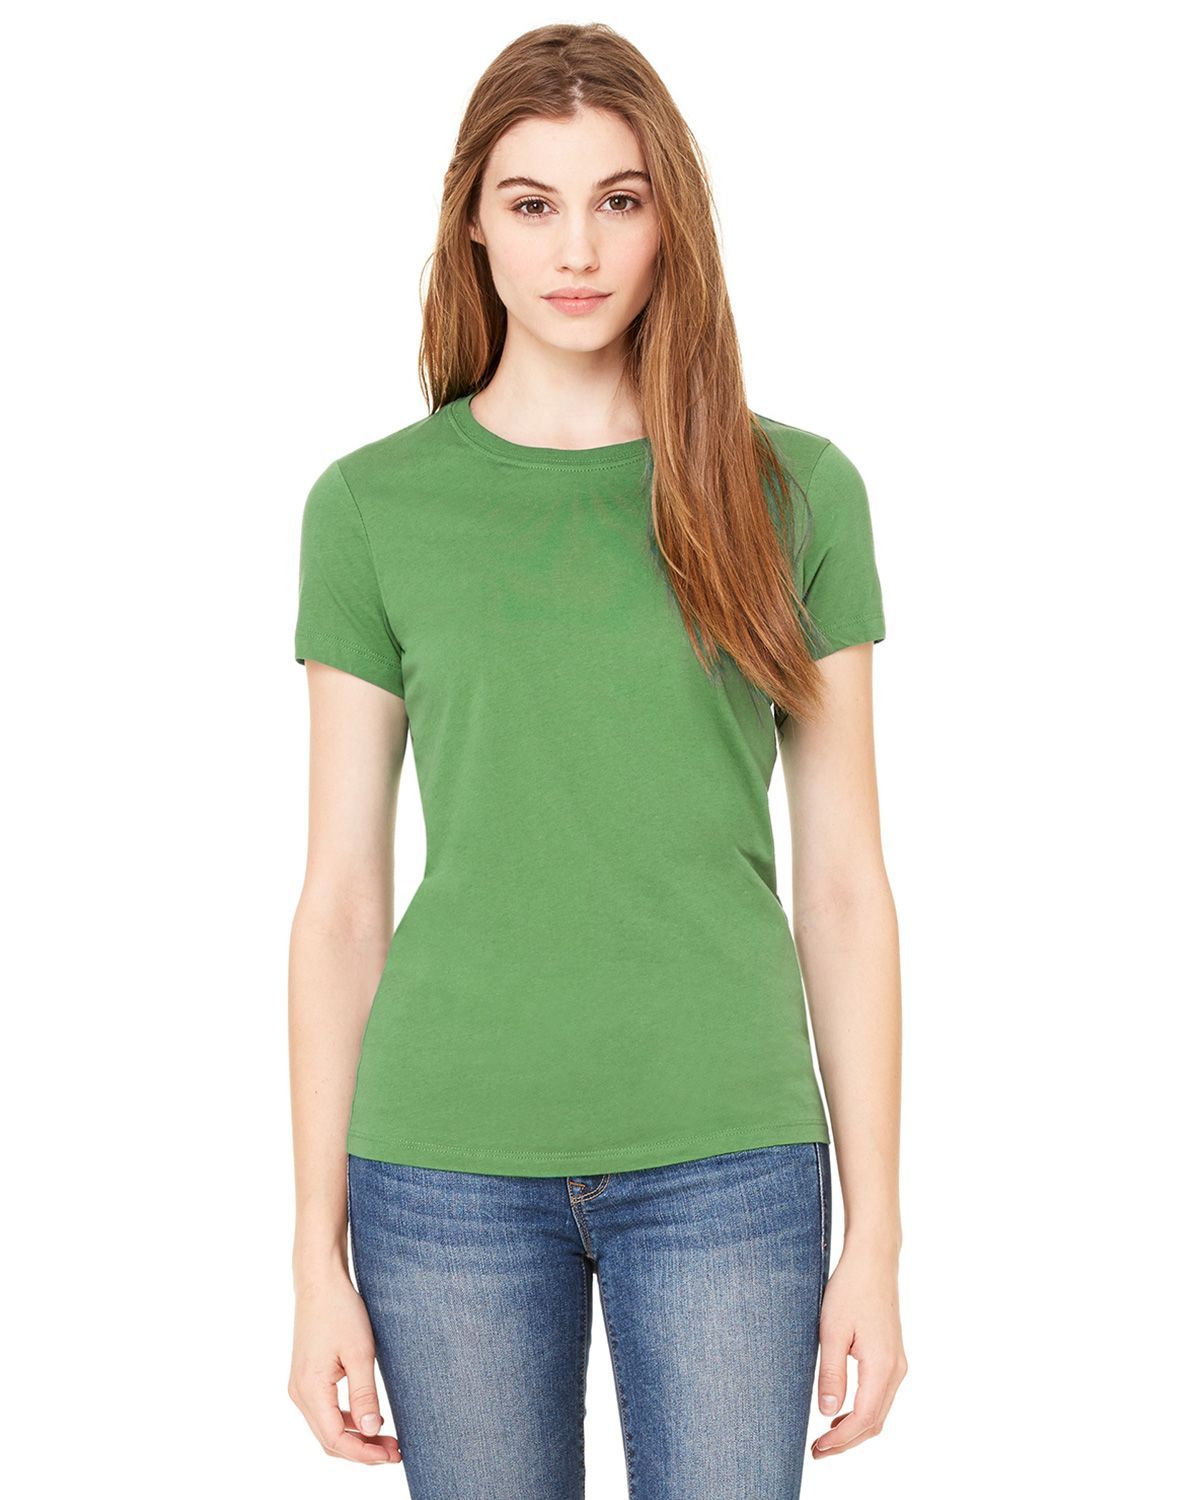 bella-canvas-the-bella-canvas-ladies-relaxed-jersey-short-sleeve-v